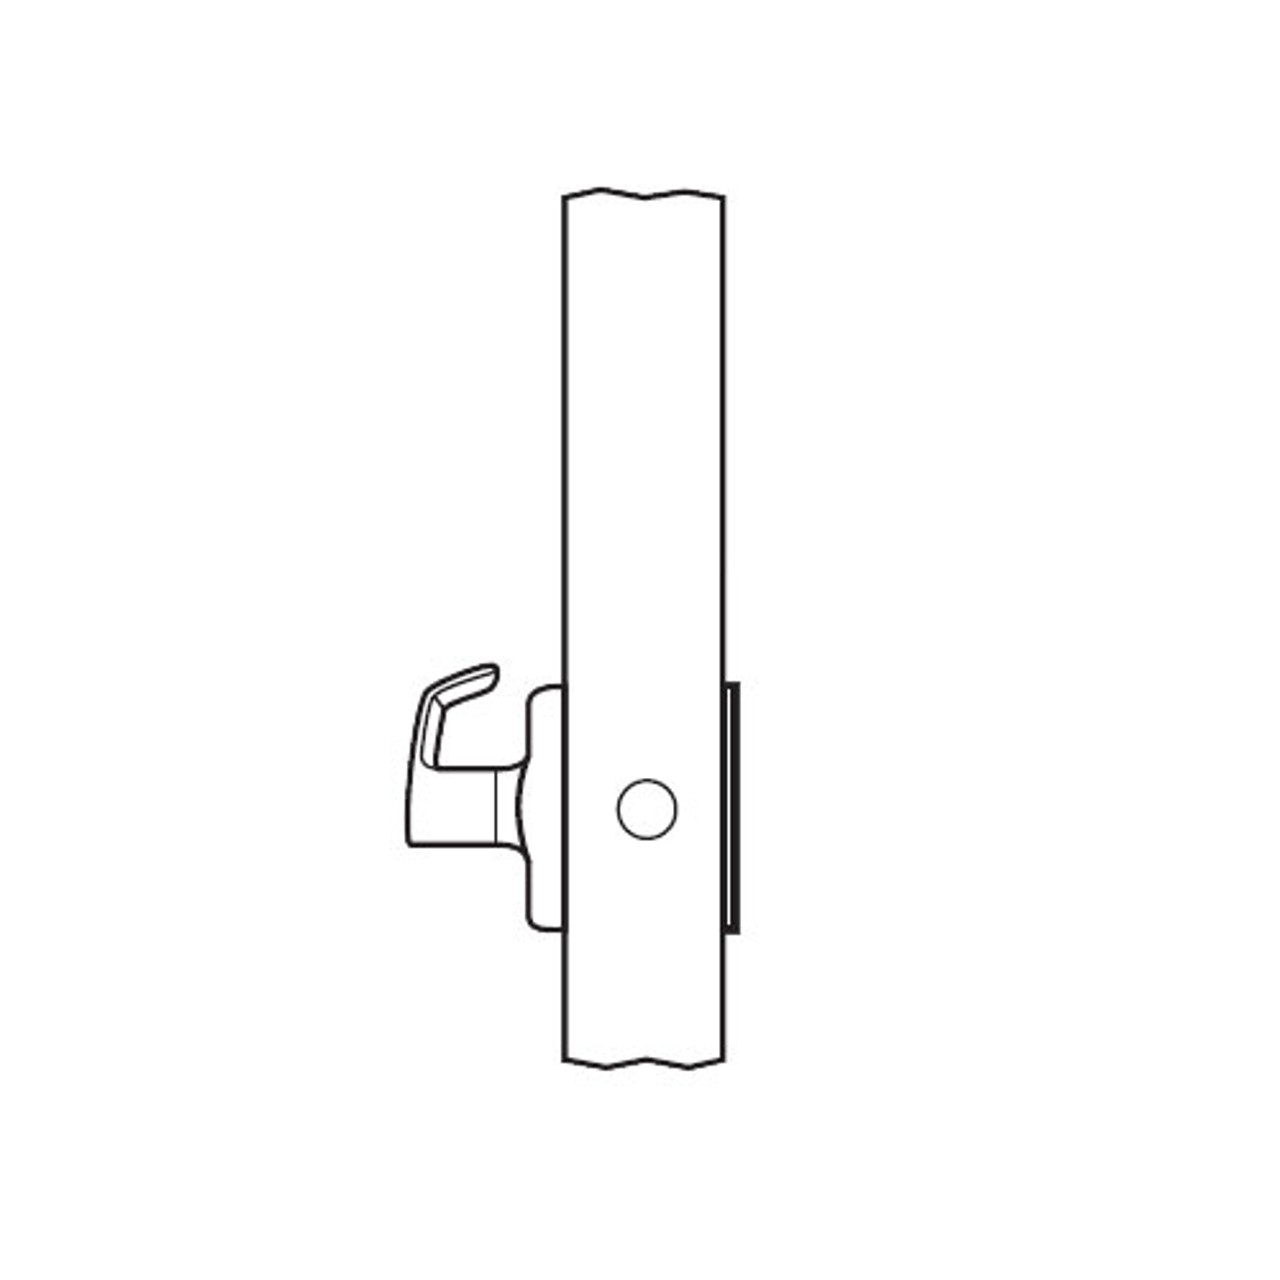 BM08-HSL-04 Arrow Mortise Lock BM Series Single Dummy Lever with Hastings Design in Satin Brass